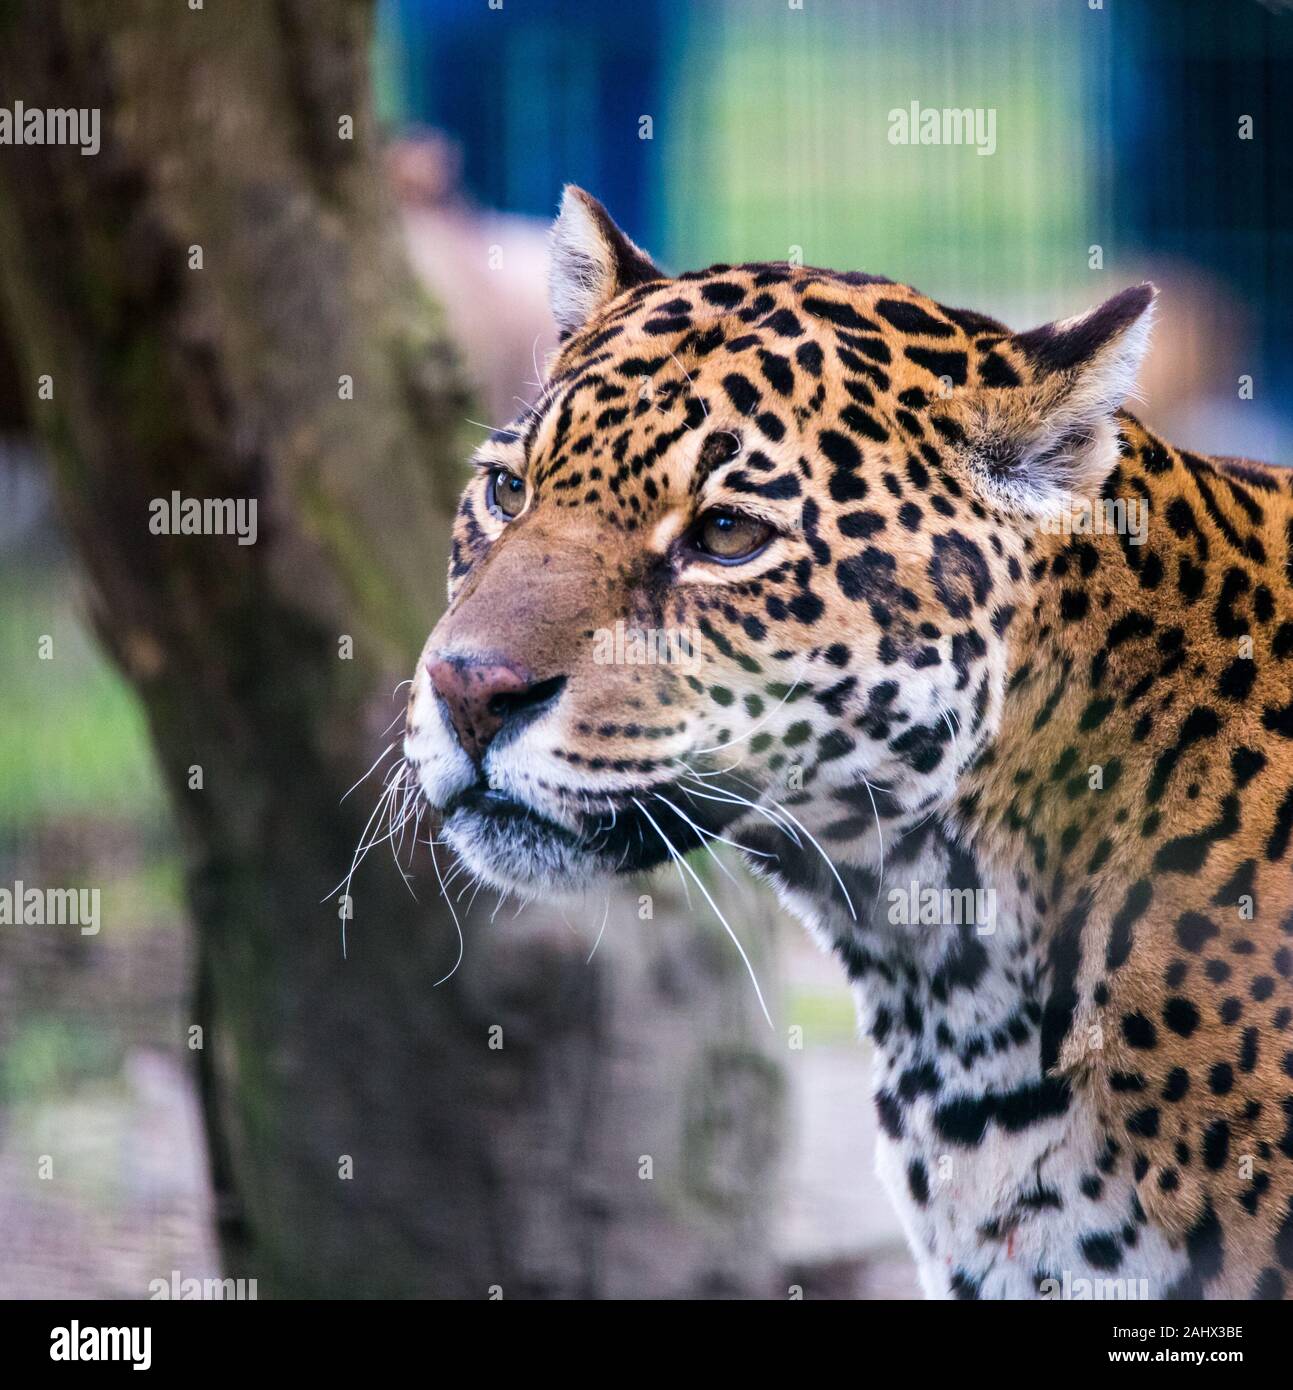 A captive Jaguar in a zoo as part of a conservation drive to increase numbers. The shot was taken at feeding time. Stock Photo